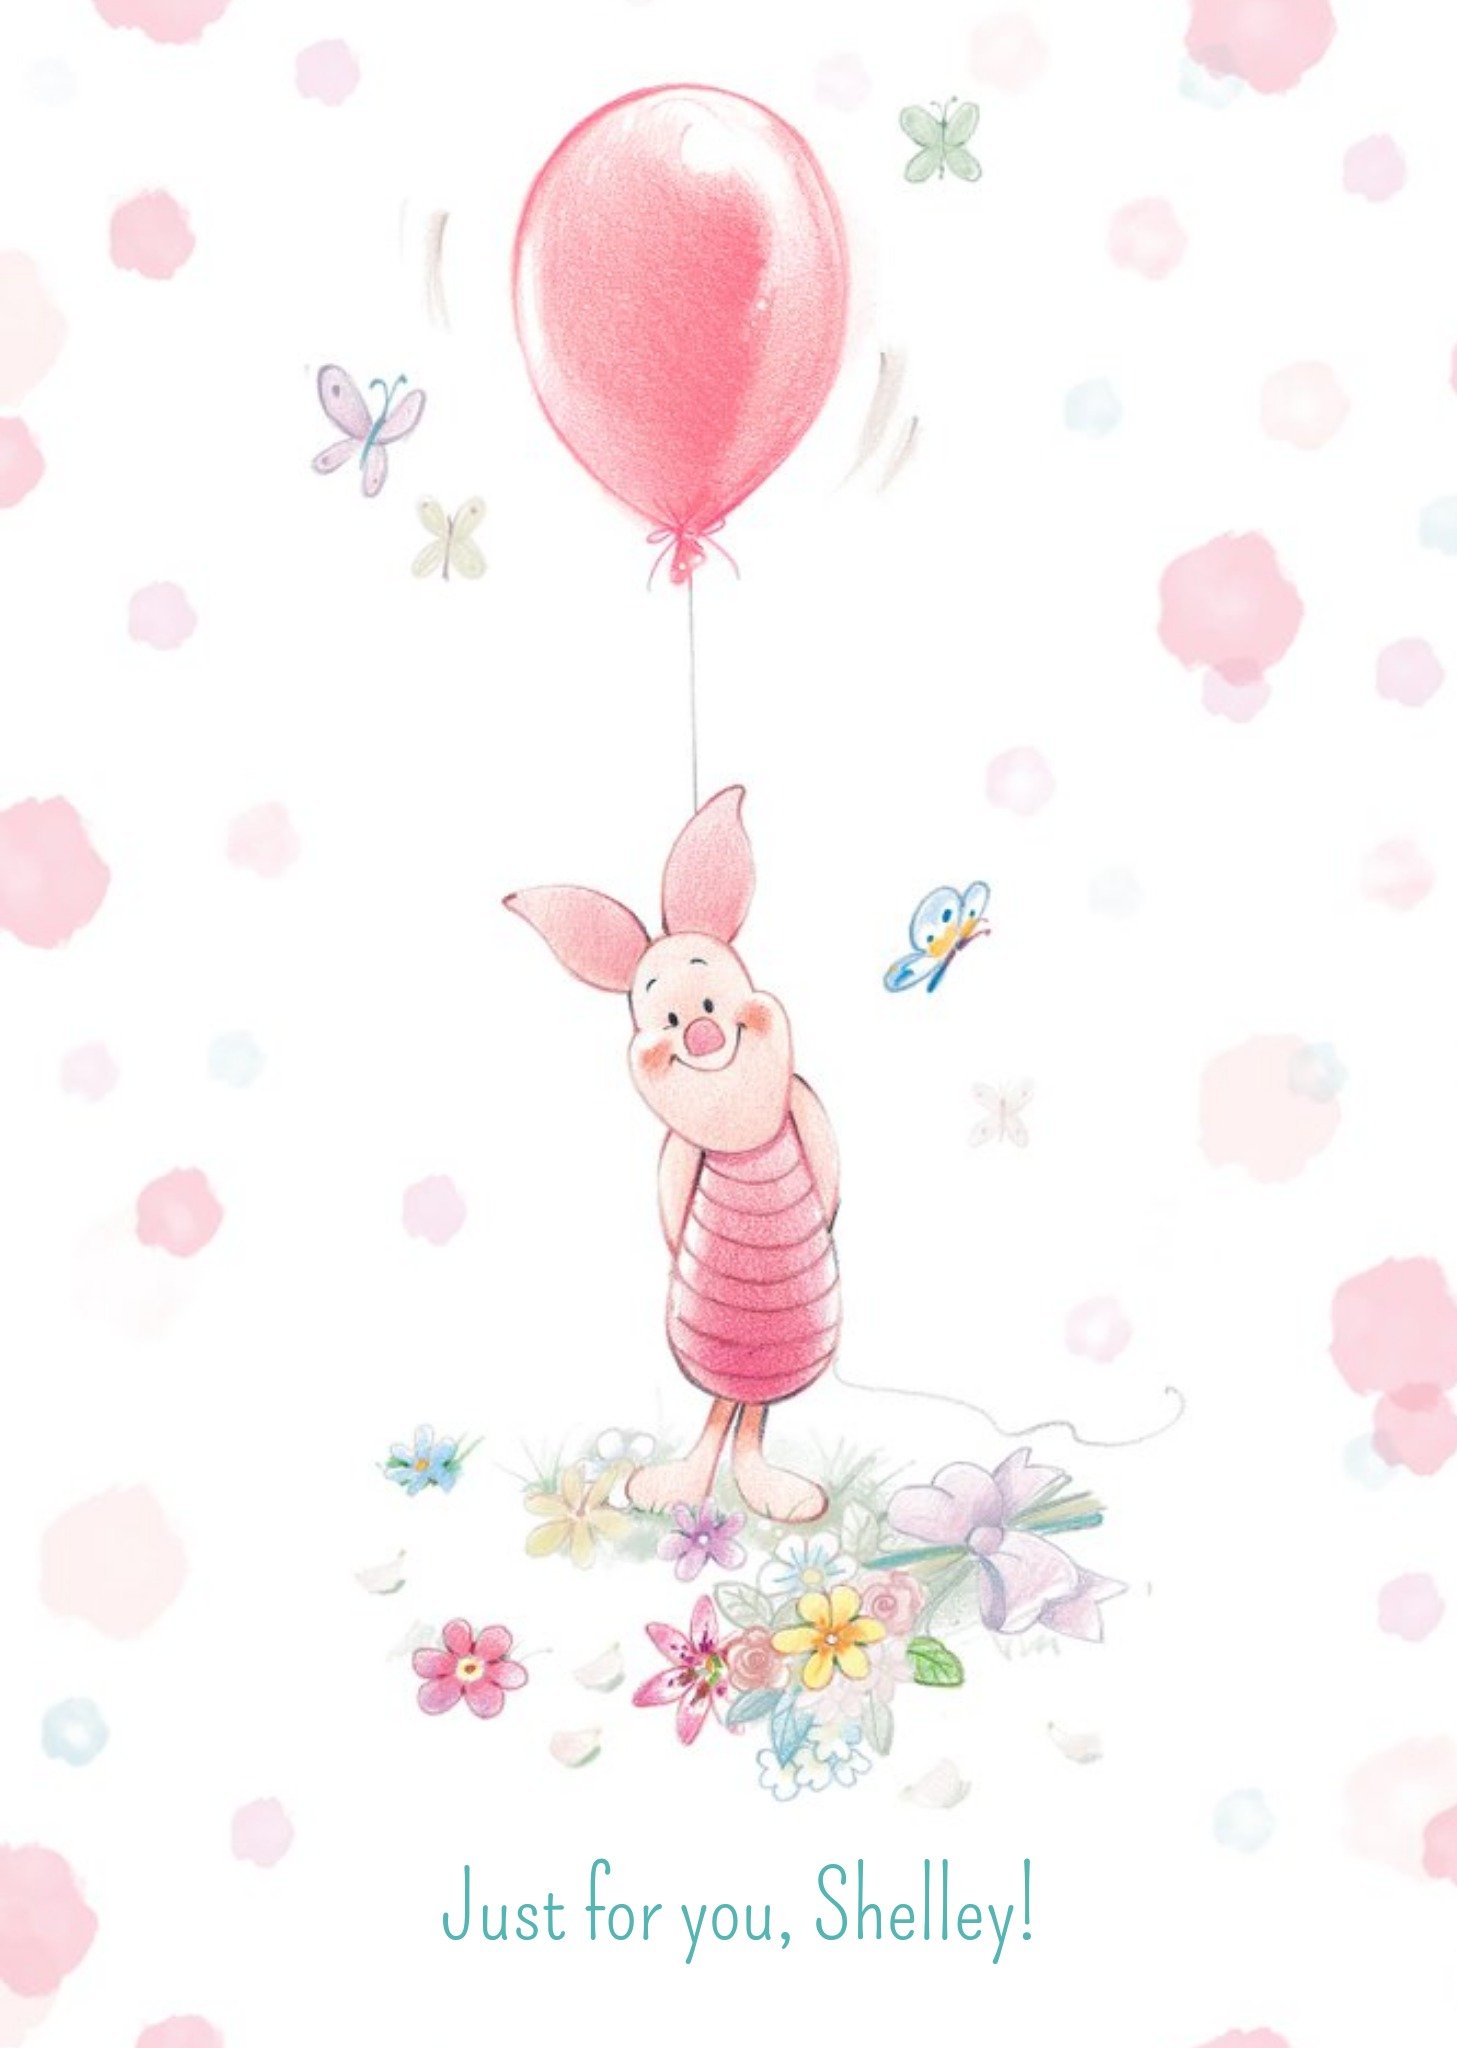 Disney Winnie The Pooh Piglet With Balloon Just For You Card Ecard